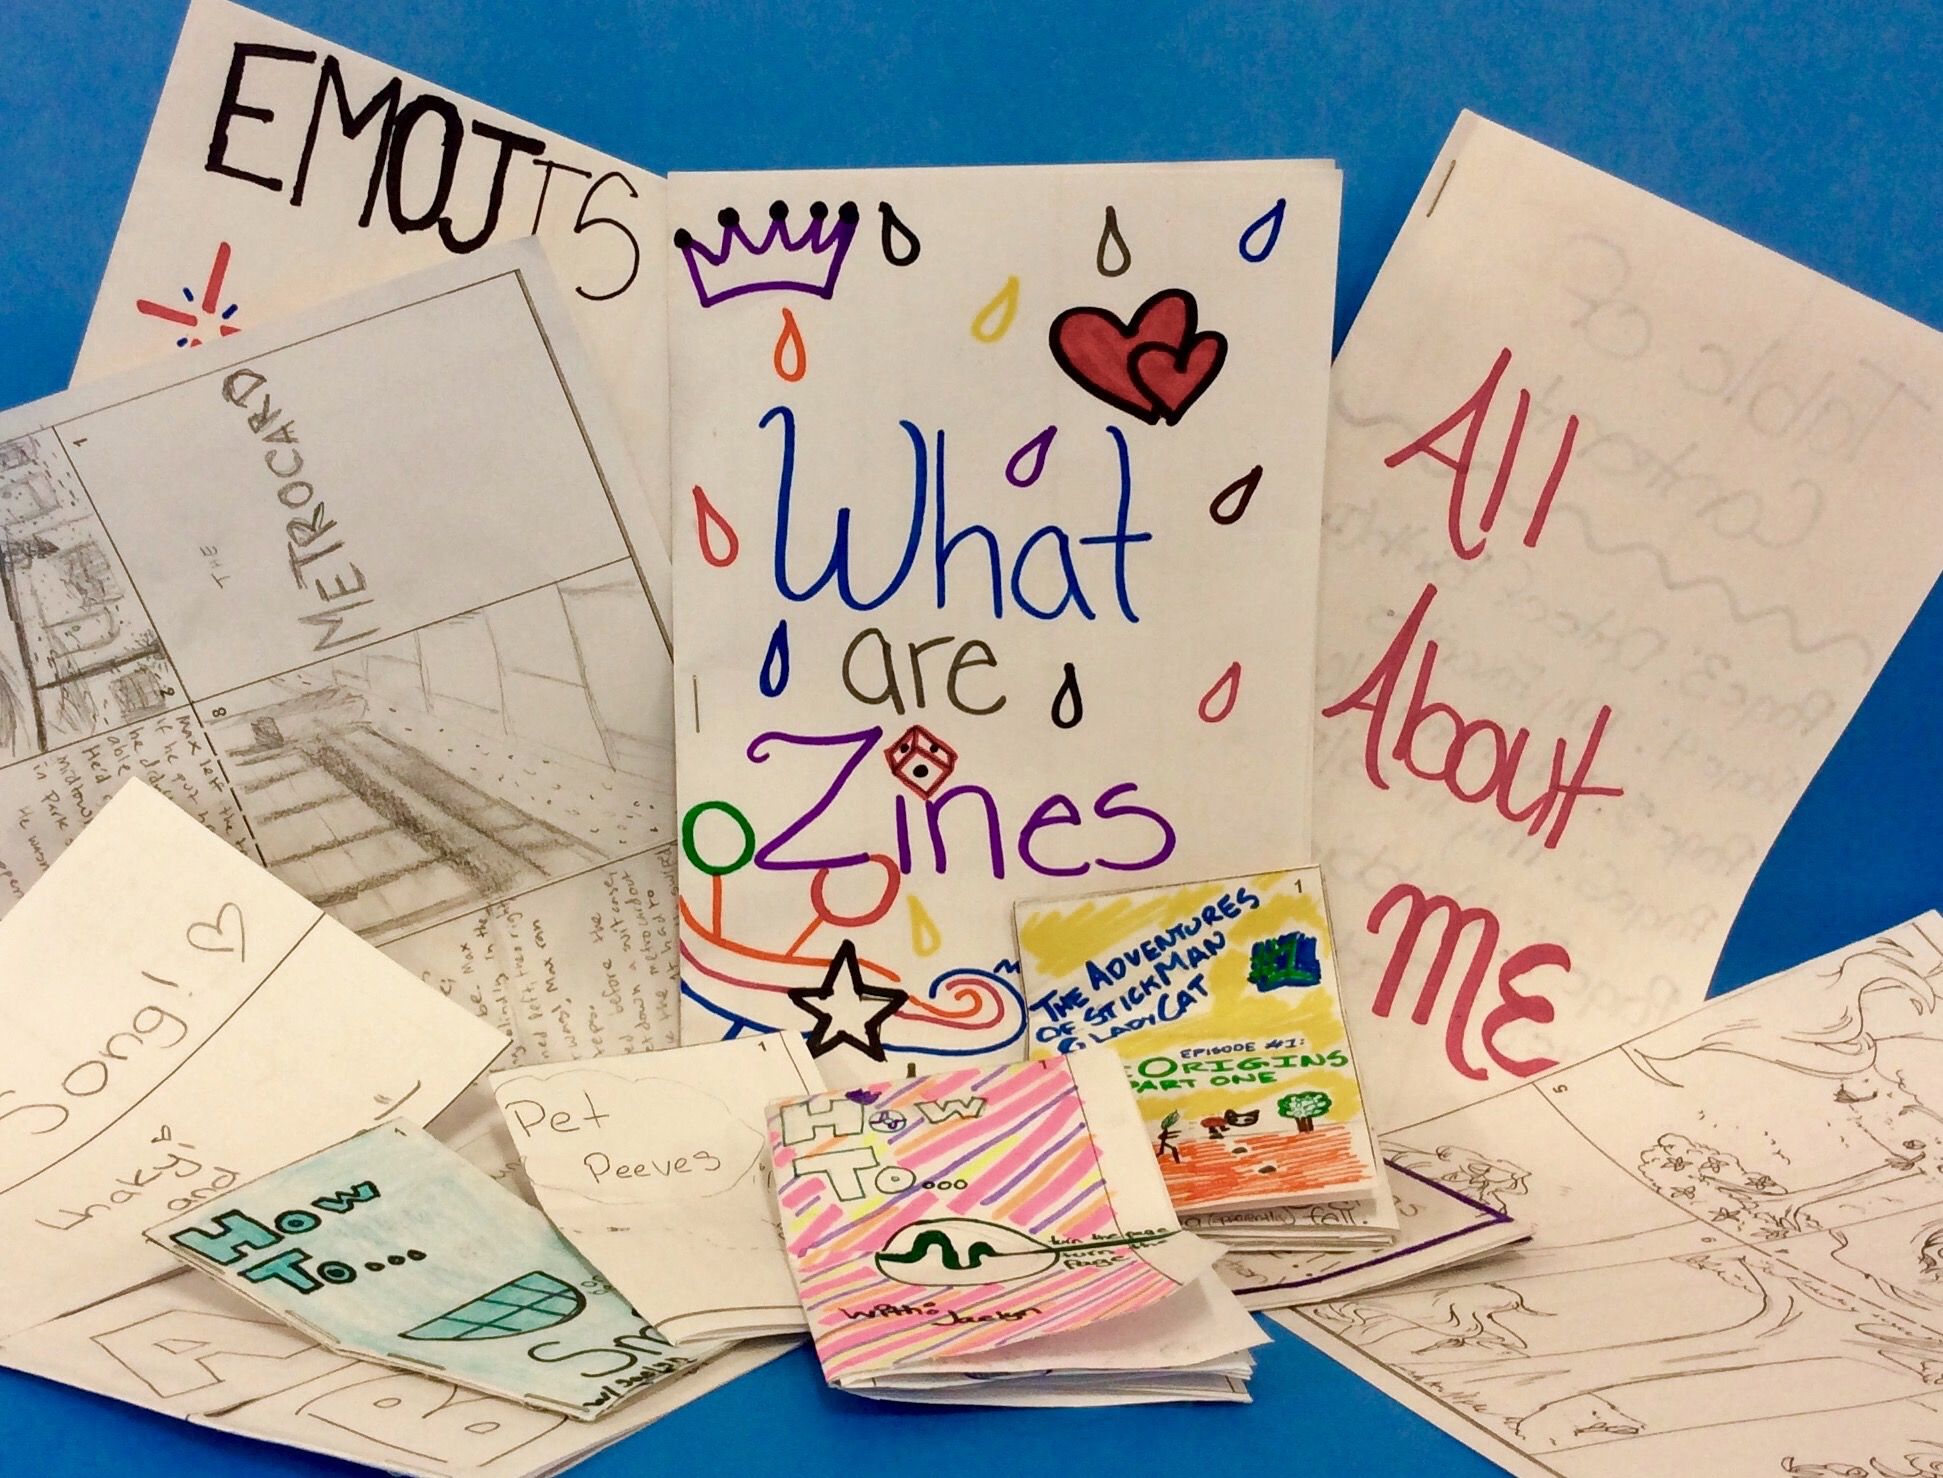 Multiple pieces of paper folded into zines with children's writing and illustrations on them